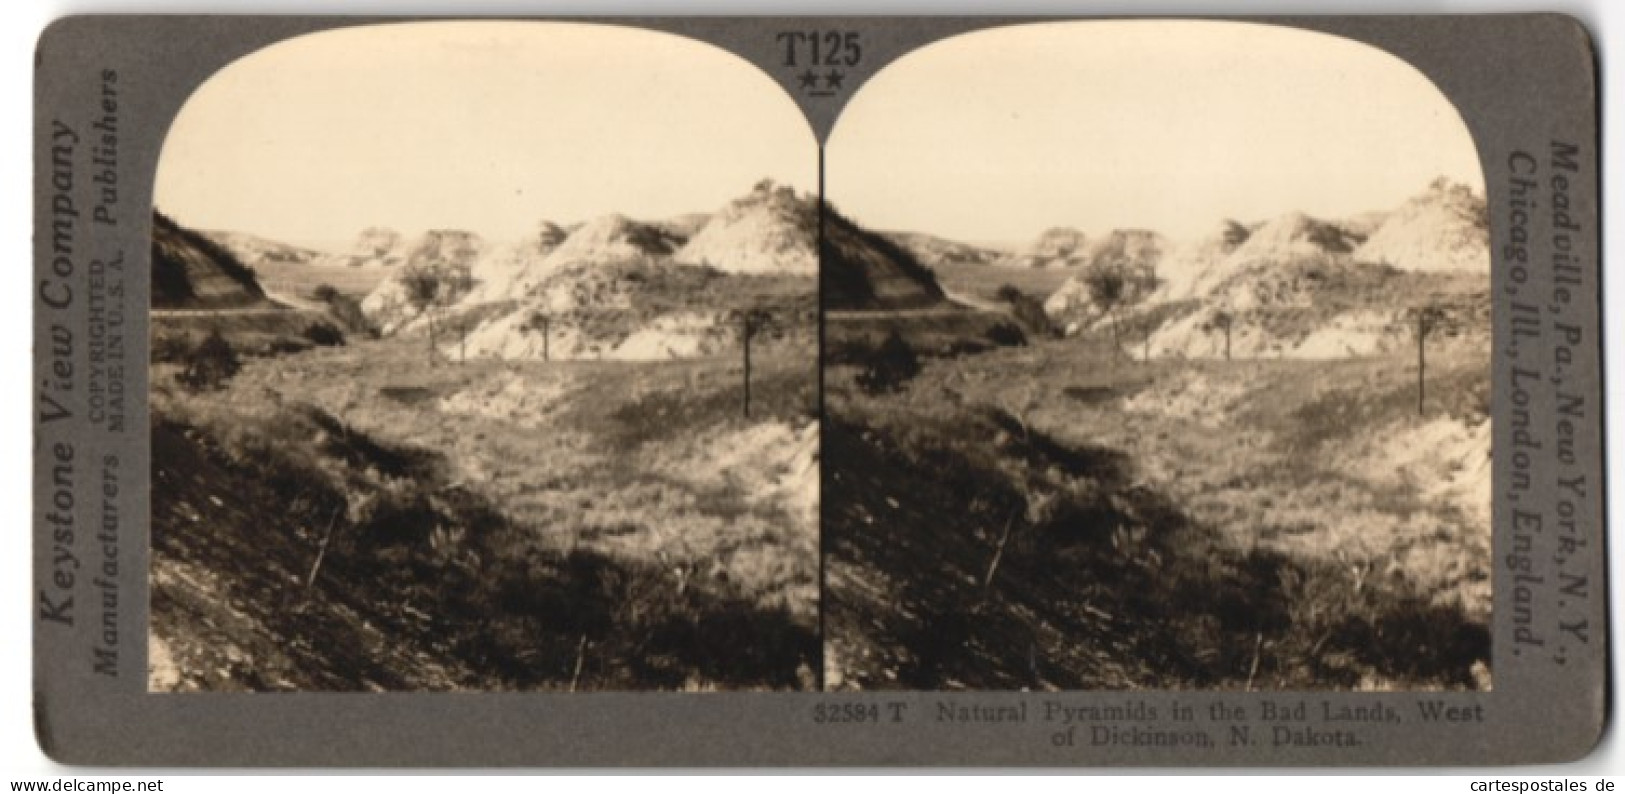 Stereo-Fotografie Keystone View Co., Meadville / PA., Ansicht Dickinson / ND, Natural Pyramids In The Bad Lands  - Stereoscoop